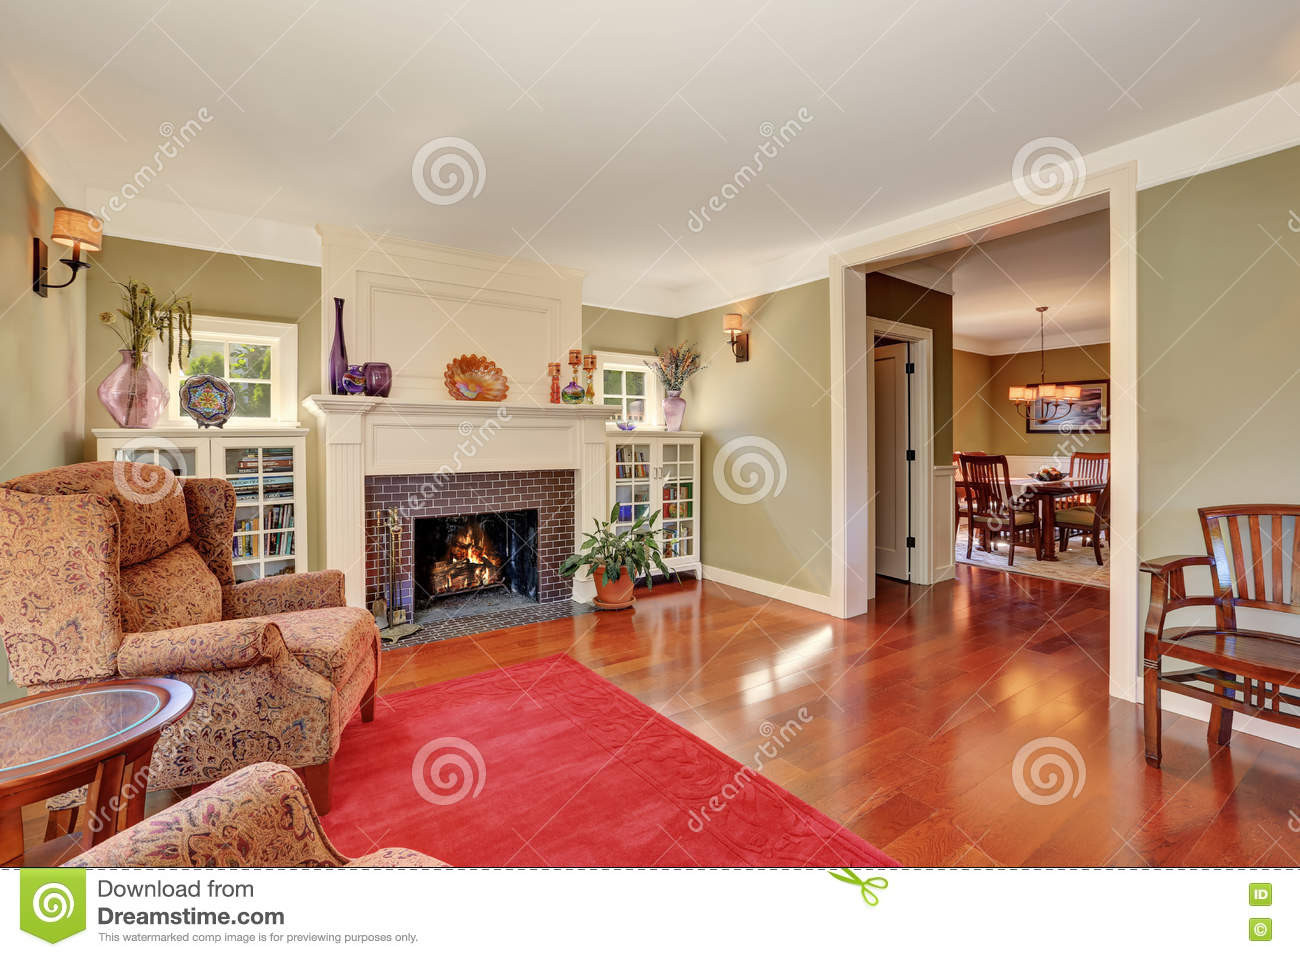 Nice Rugs For Living Room
 Nice Living Room With Vintage Furniture And Red Rug Stock